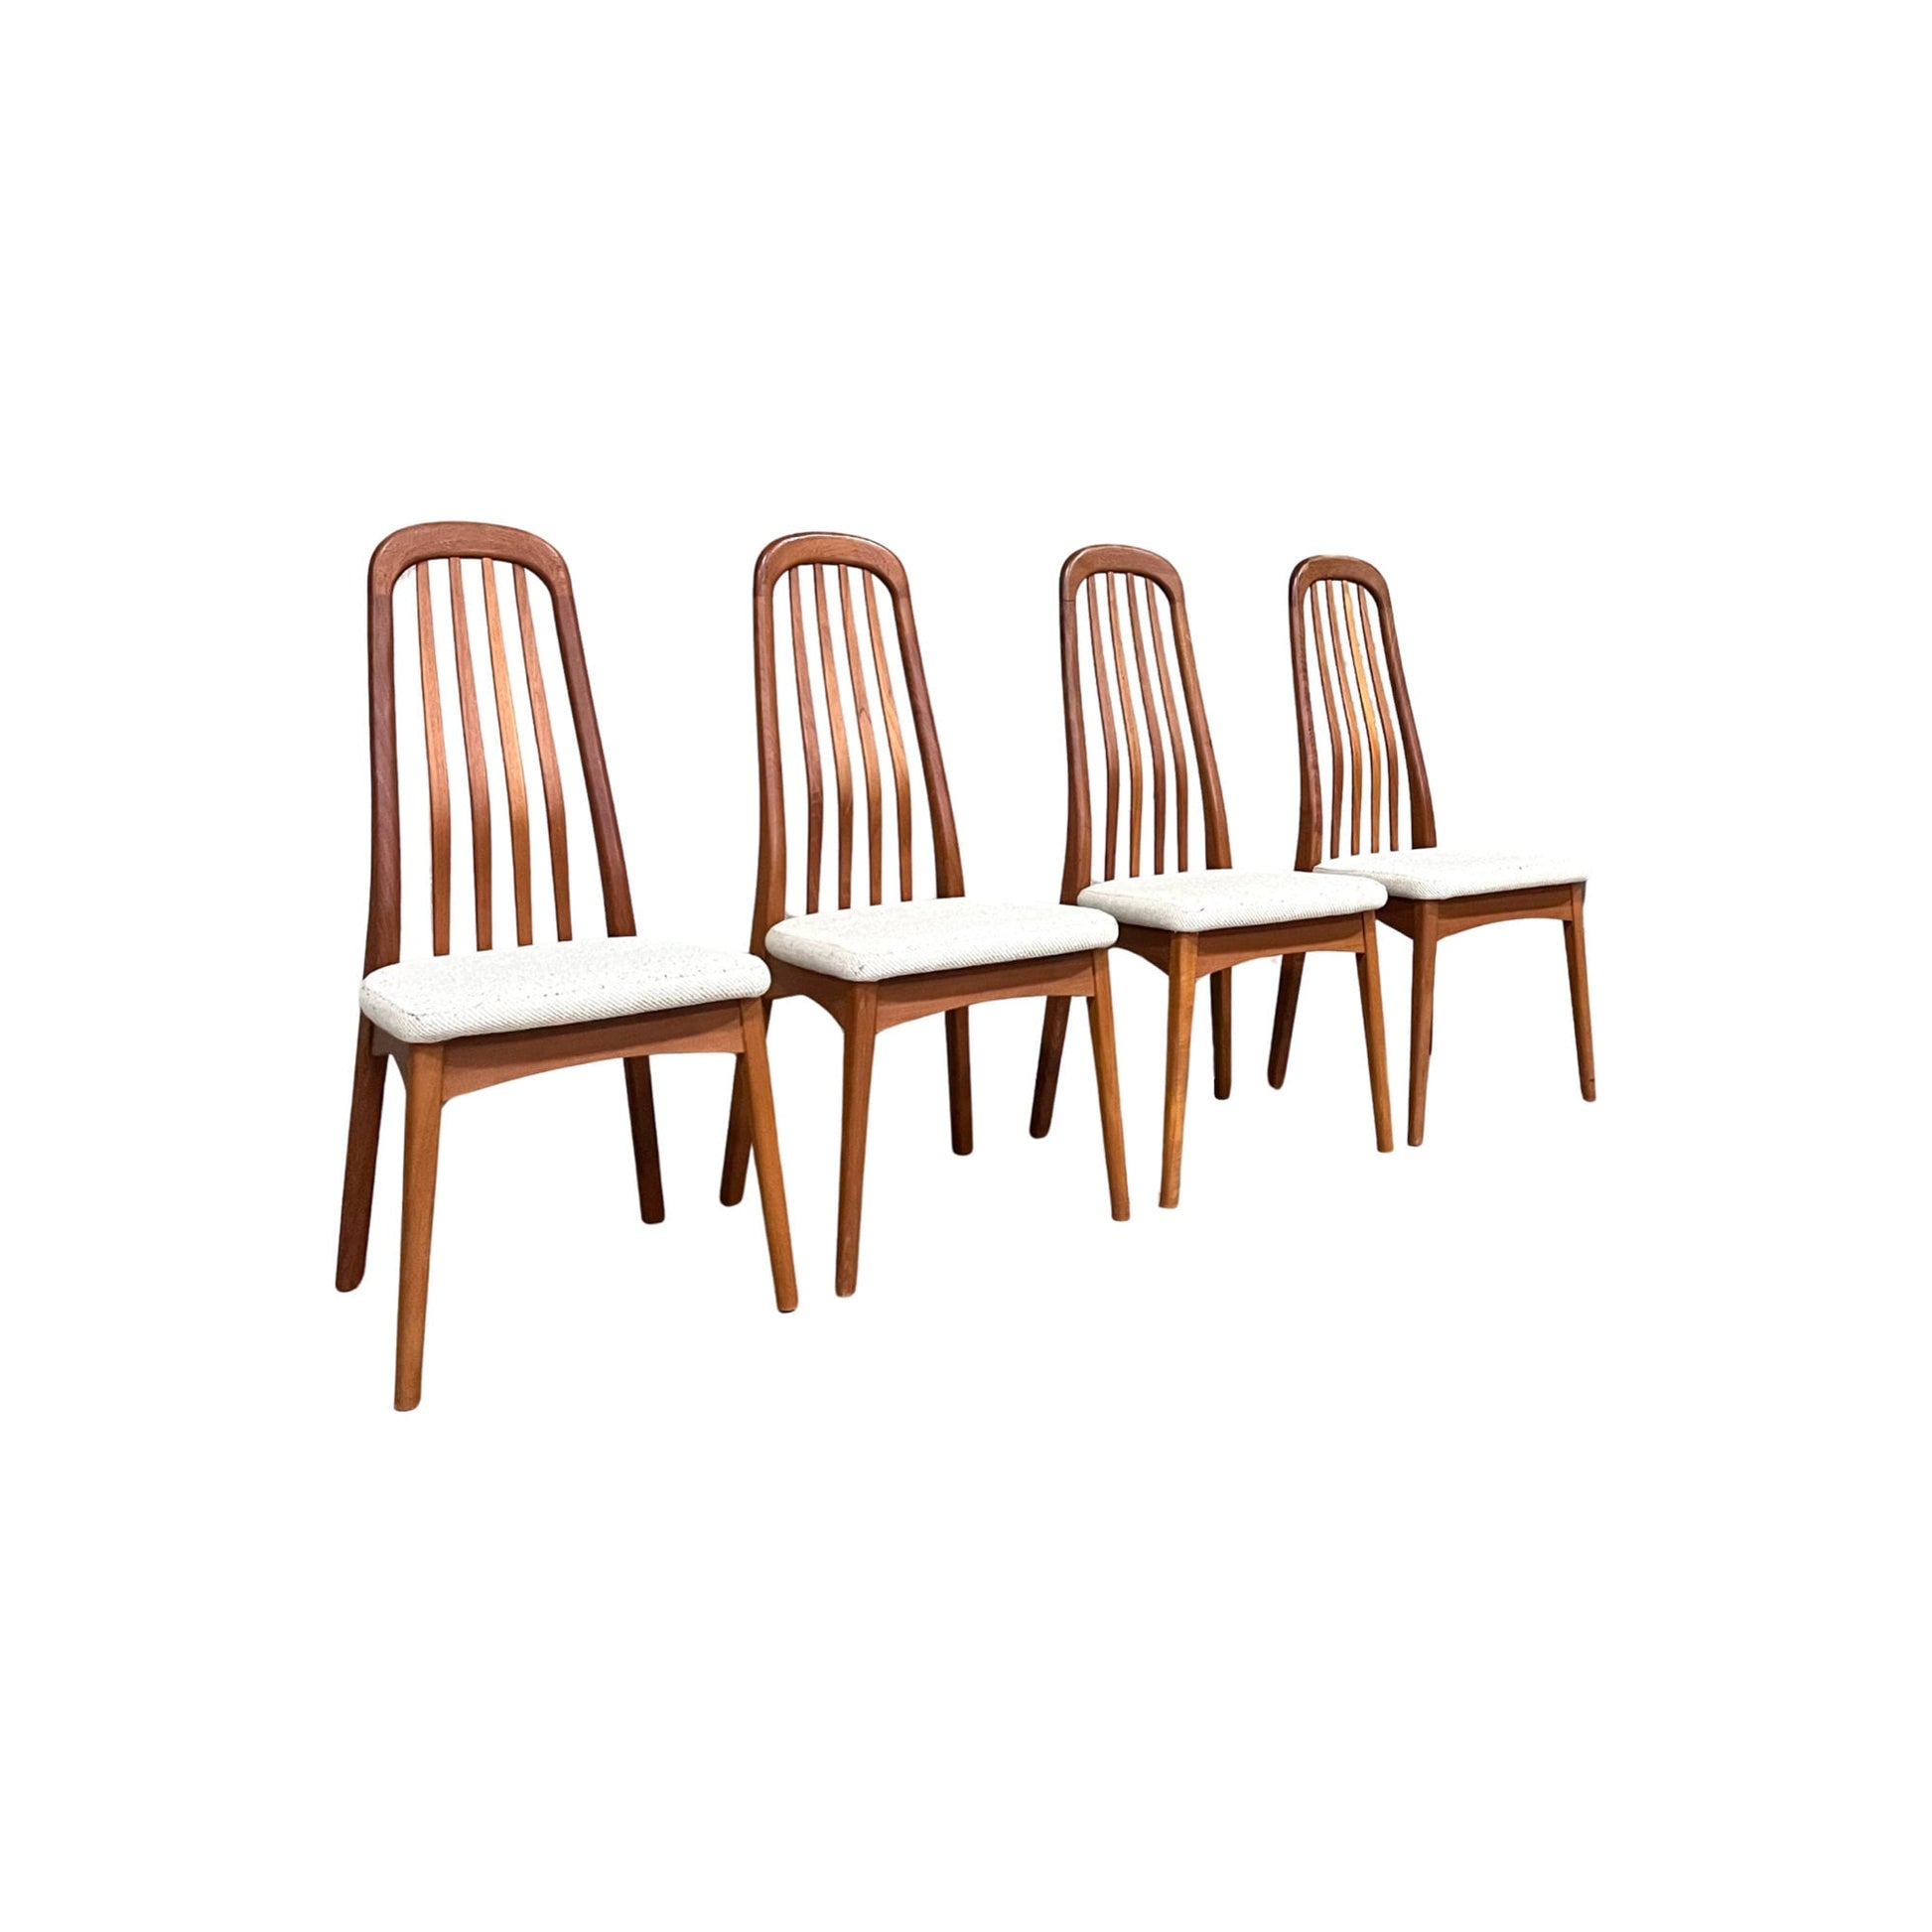 Benny Linden Teak Dining Chairs - Full Set of 4